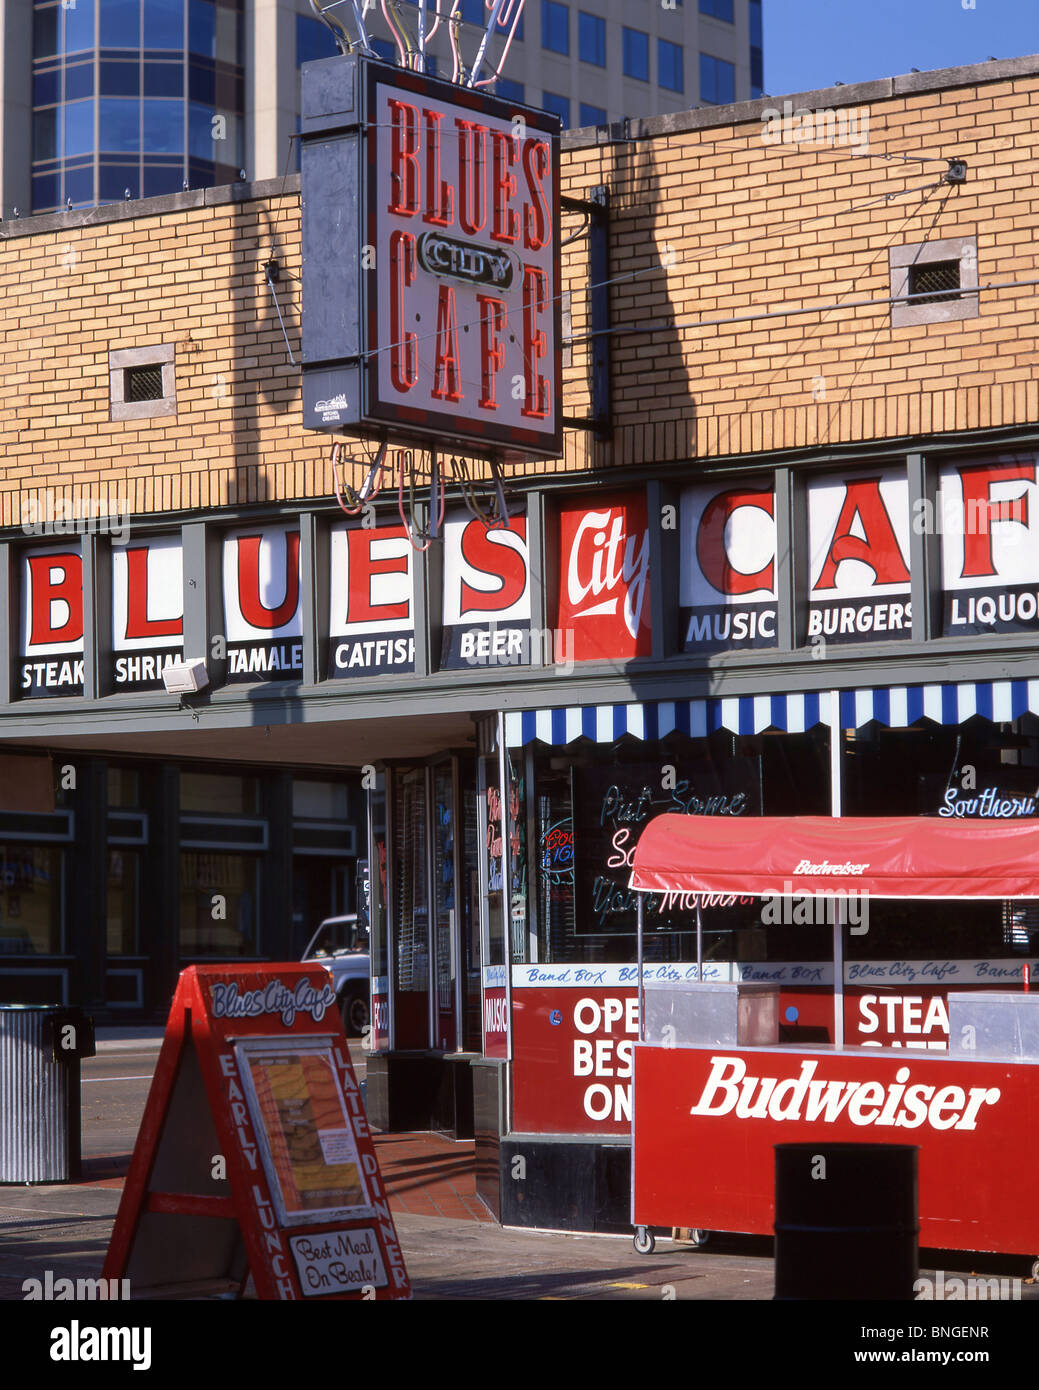 Blues Cafe, Beale Street, Beale Street District, Memphis, Tennessee, United States of America Stock Photo